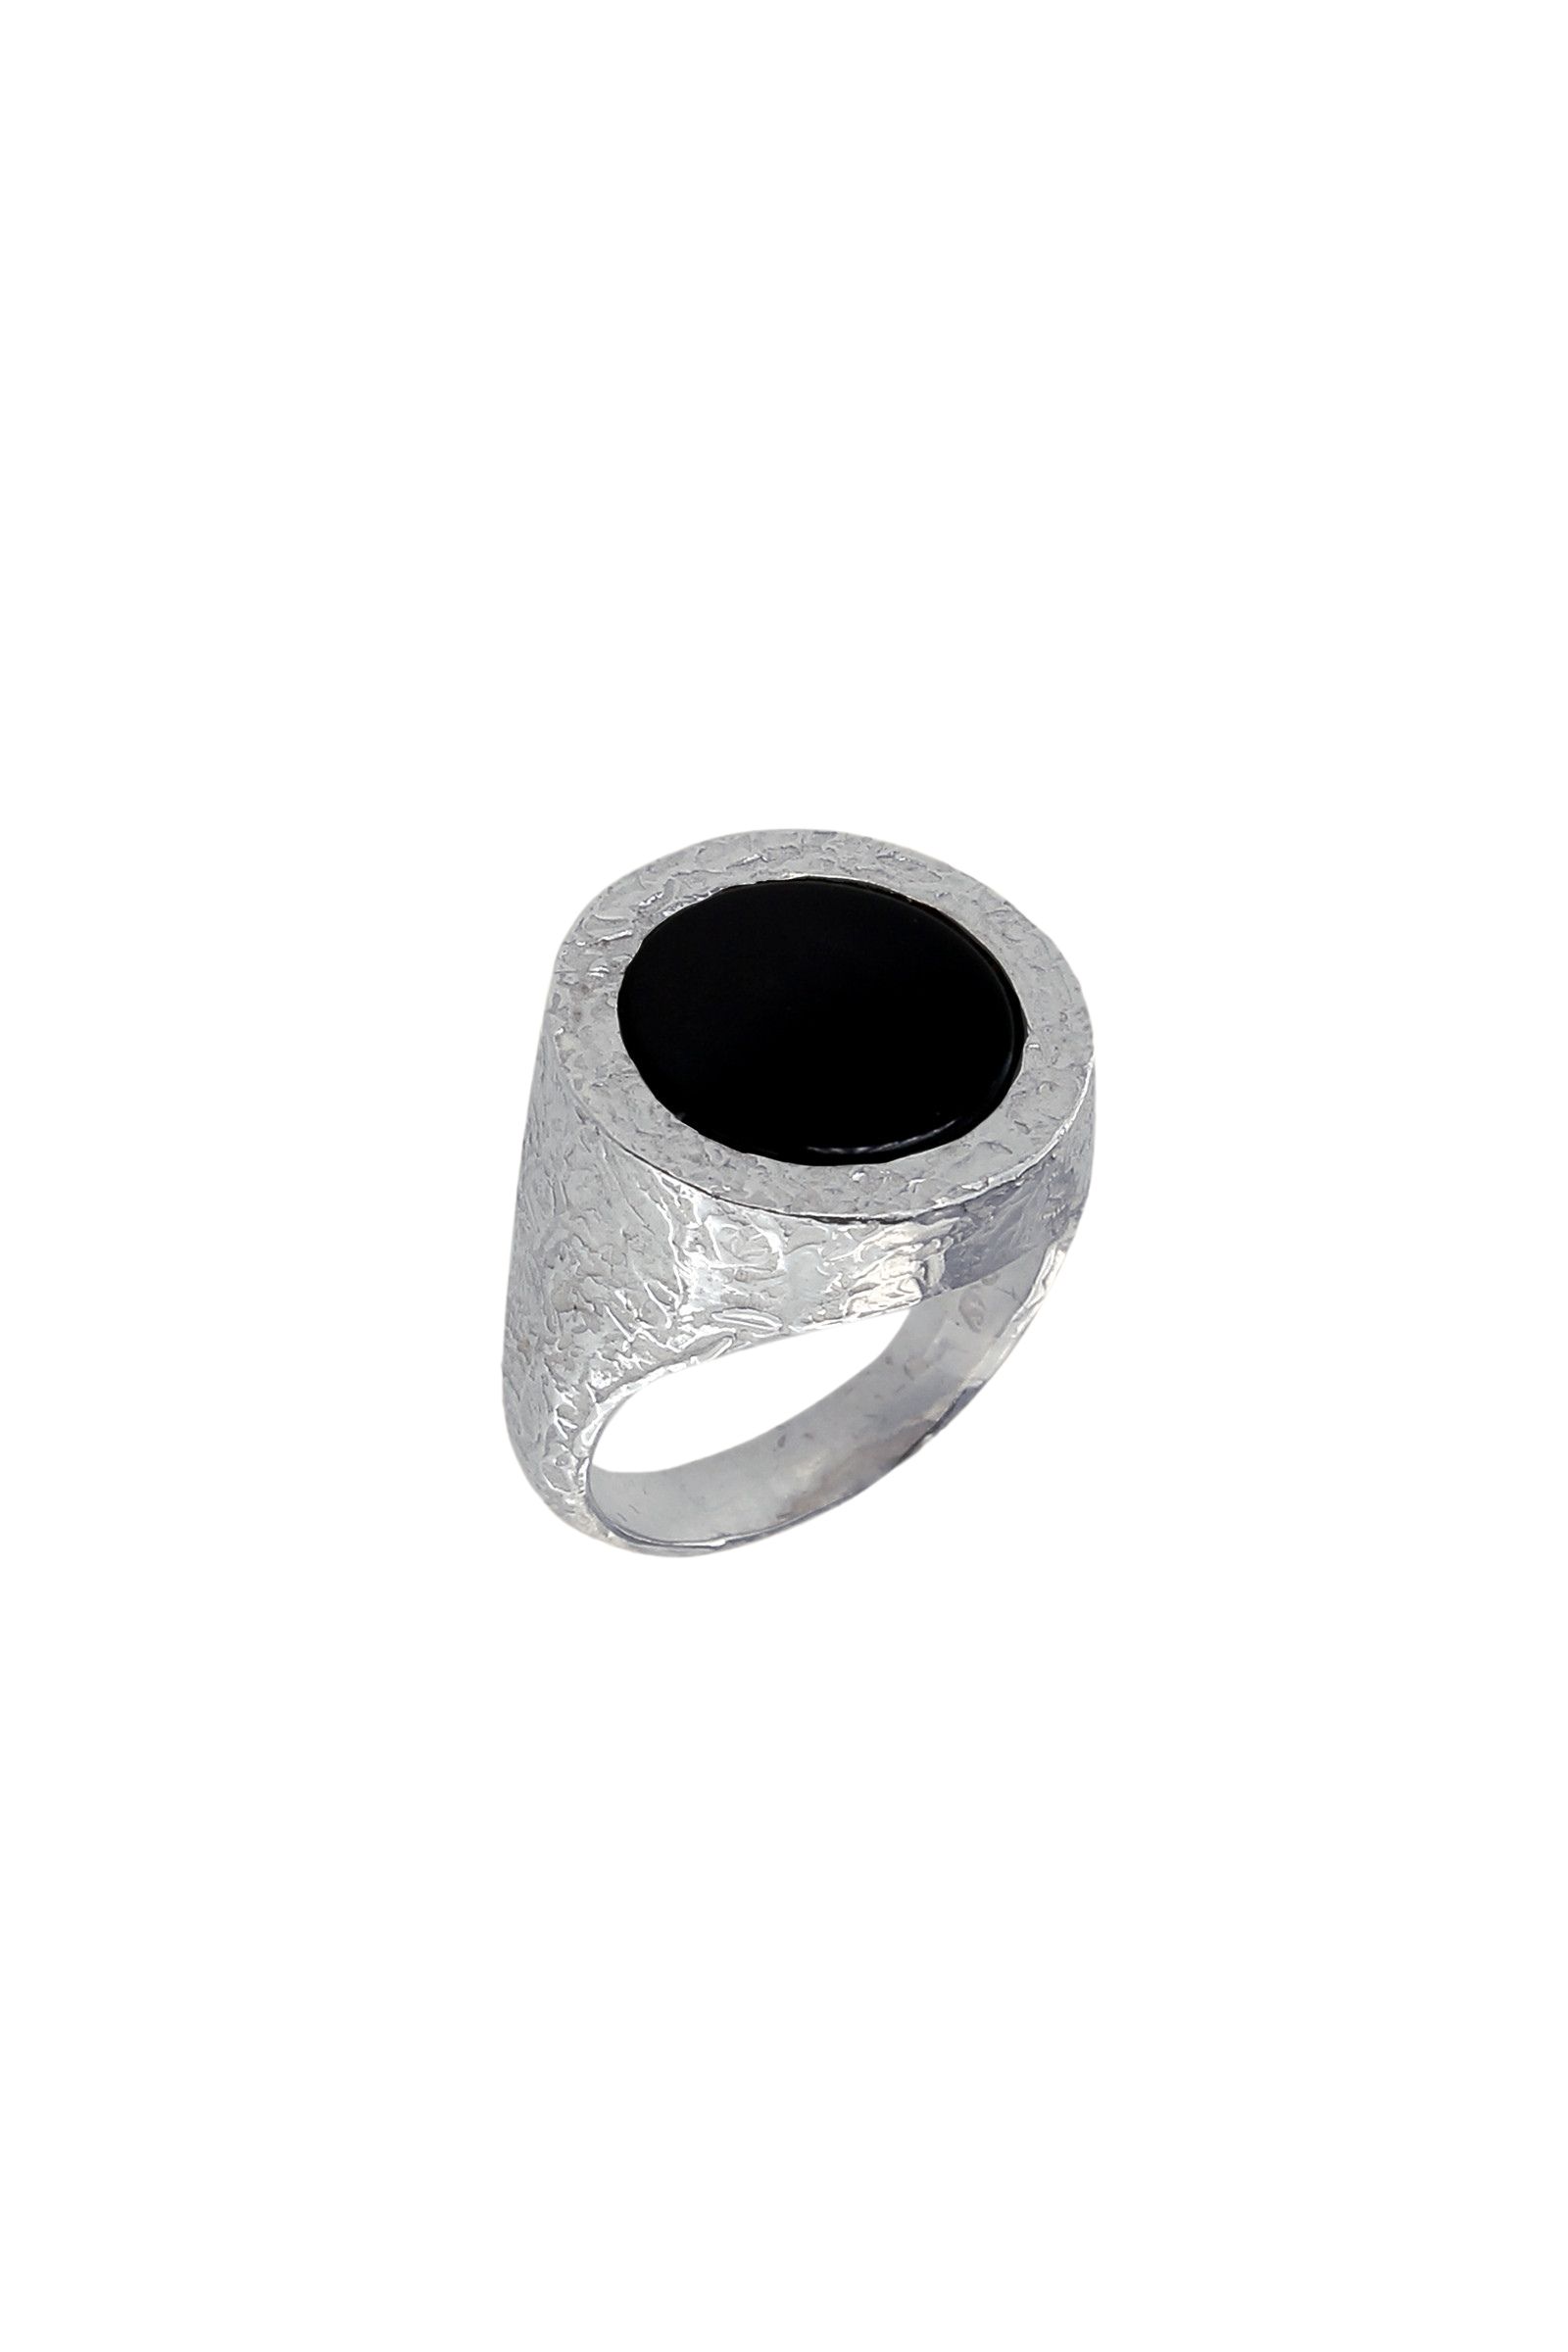 AE651-Onyx-Sterling-Silver-925-Signet-Ring-with-Onyx-1_